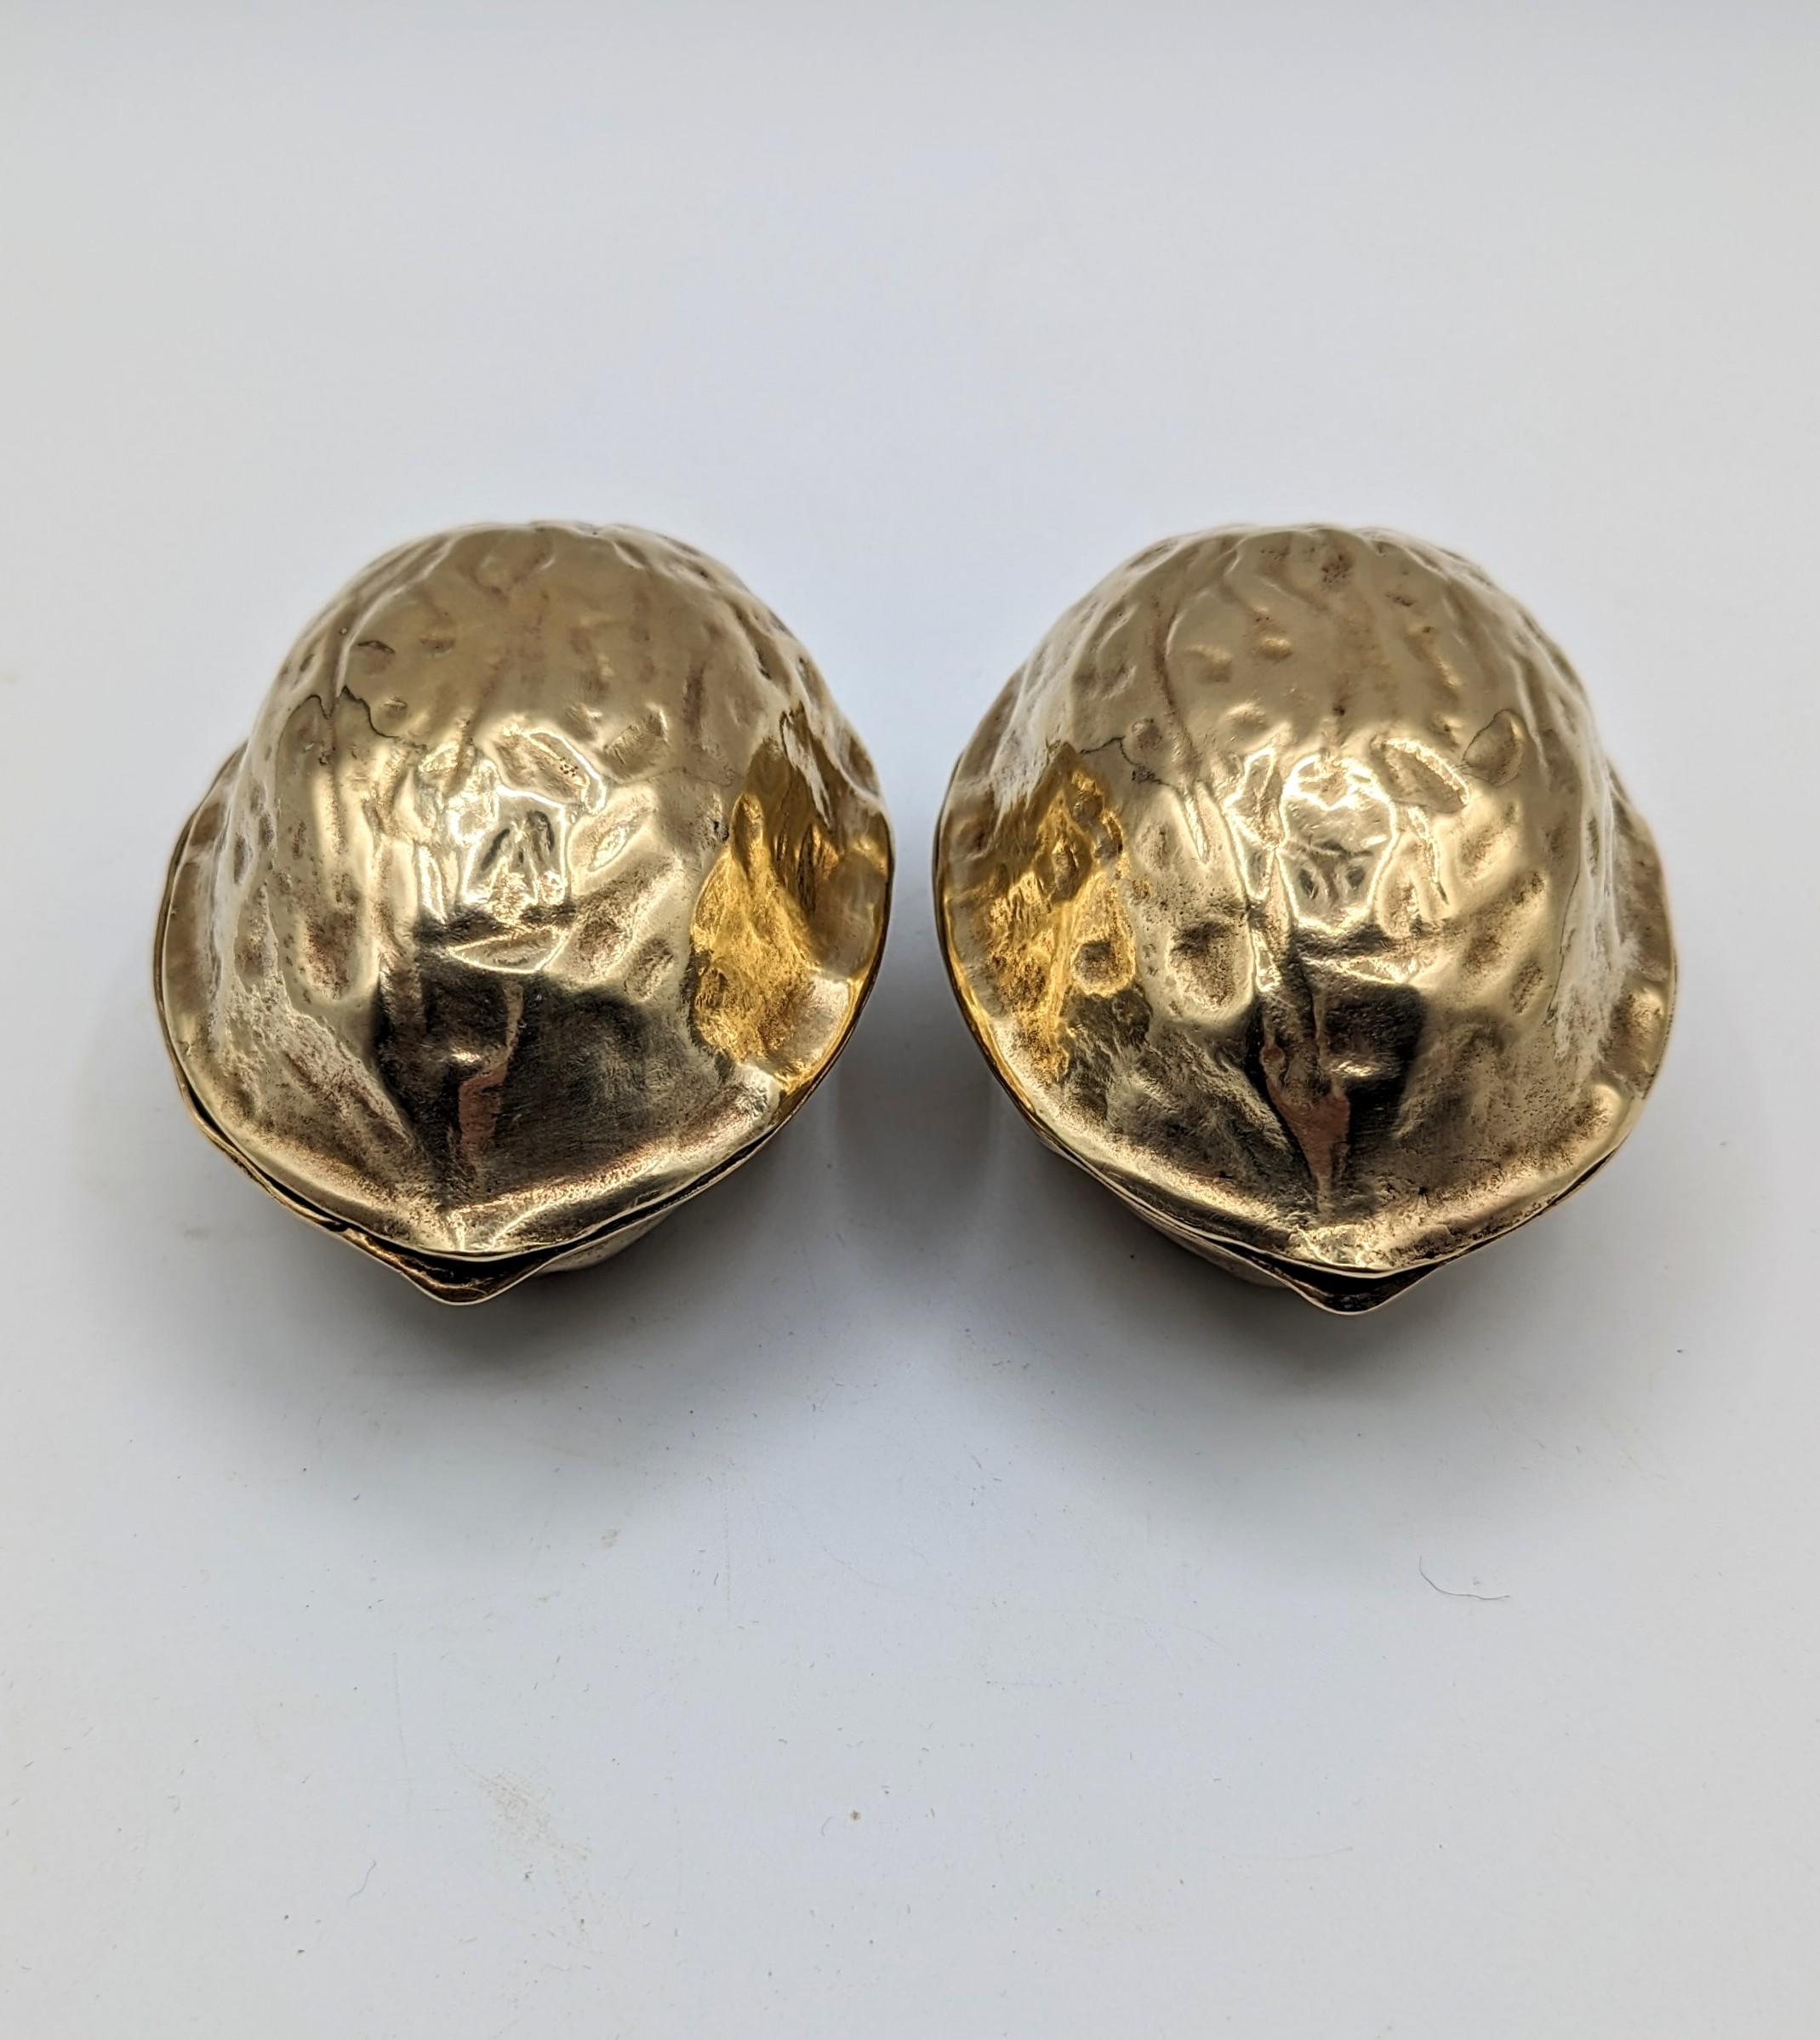 Rare and beautiful pair of brass walnut shaped nut cracker, manufactured in Spain in 1970’s. Really very decorative objects, placed on a table and also very practical when the walnut season is here. you break the nut inside, there aren't lots of